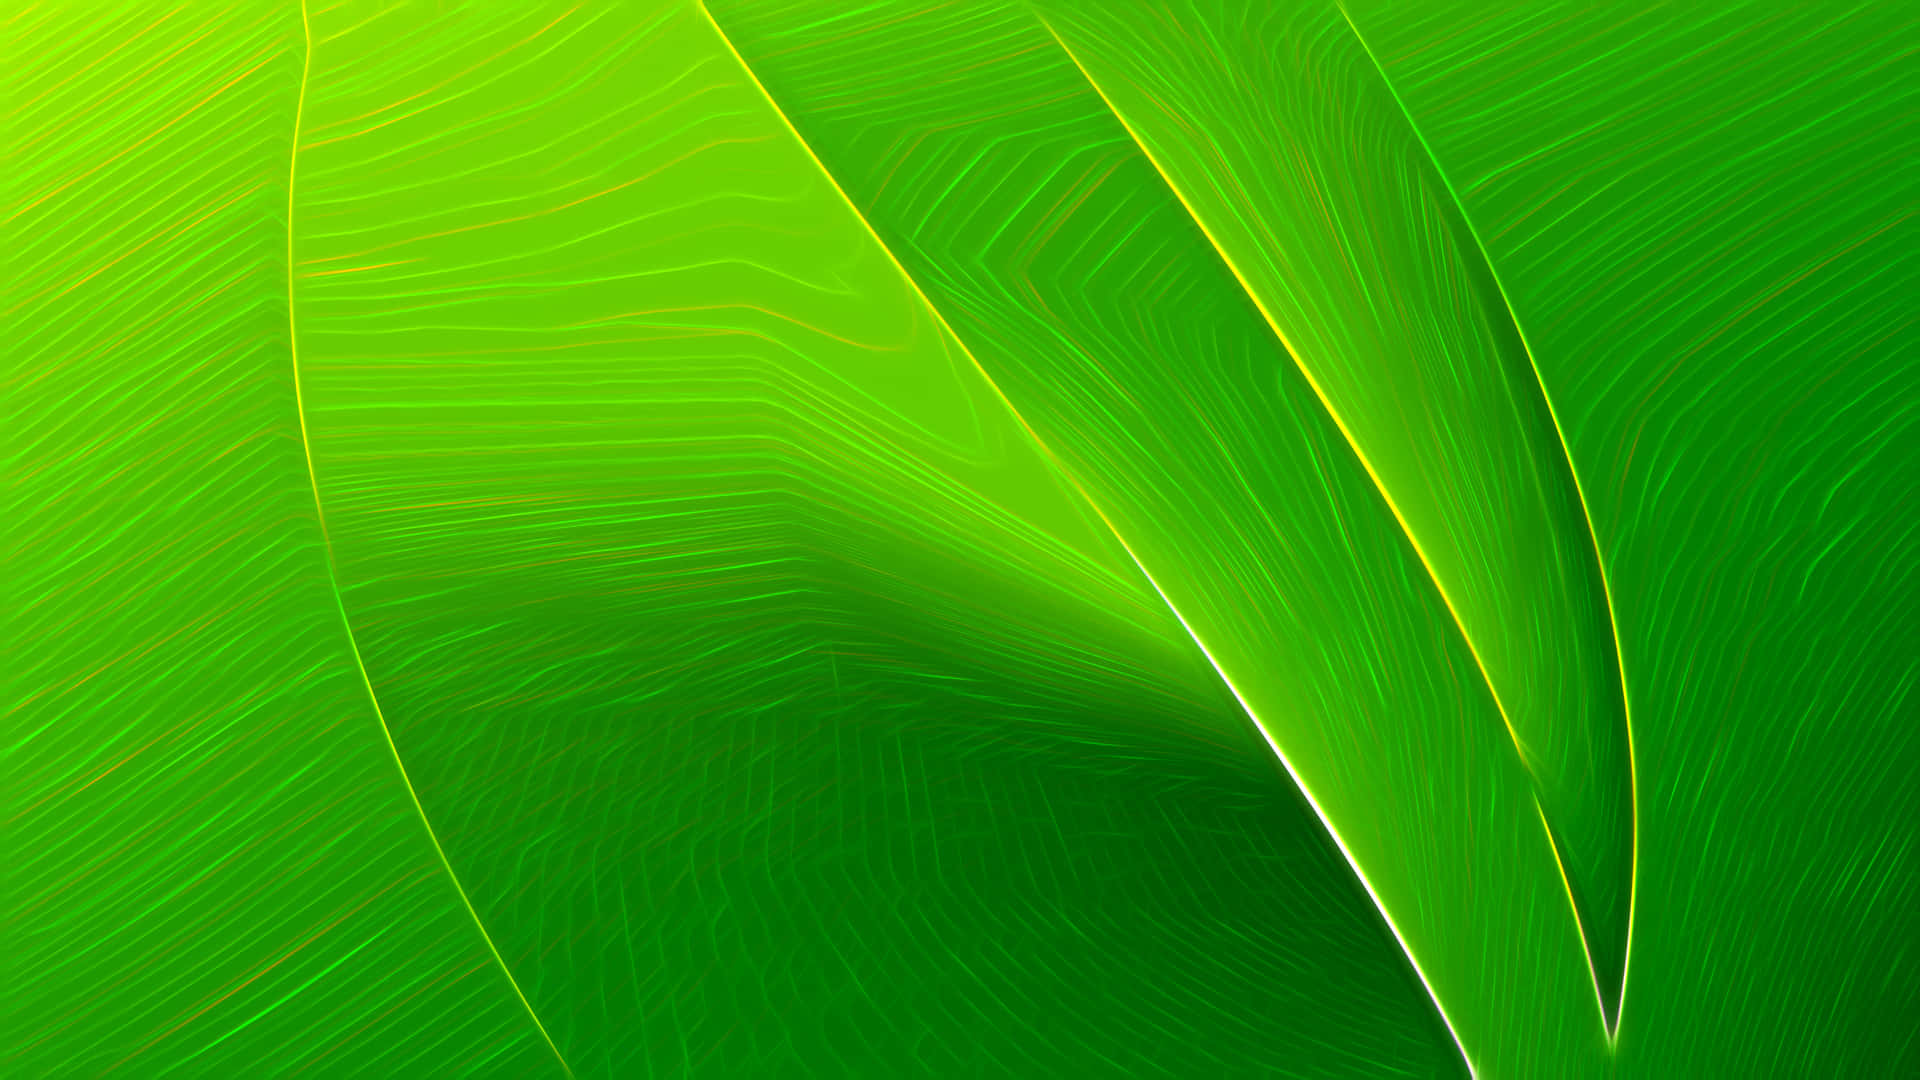 Green Texture Abstract Background Wallpaper